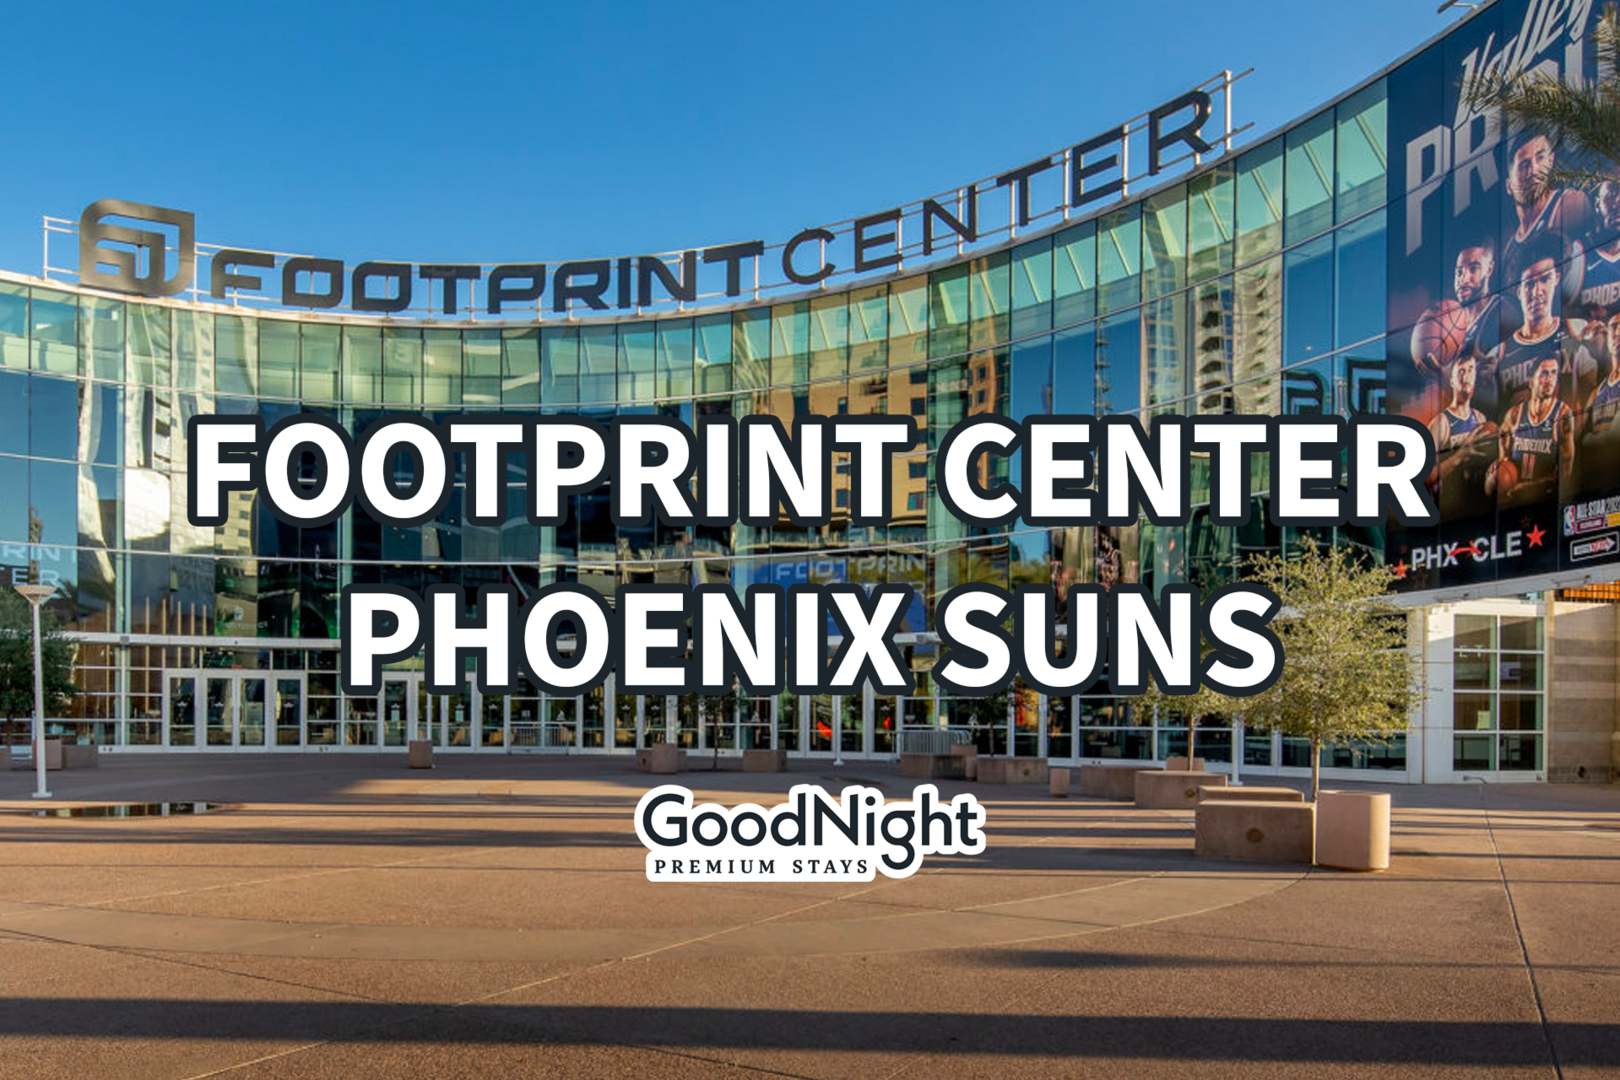 15 minutes to FootPrint Center - Home to the Phoenix Suns